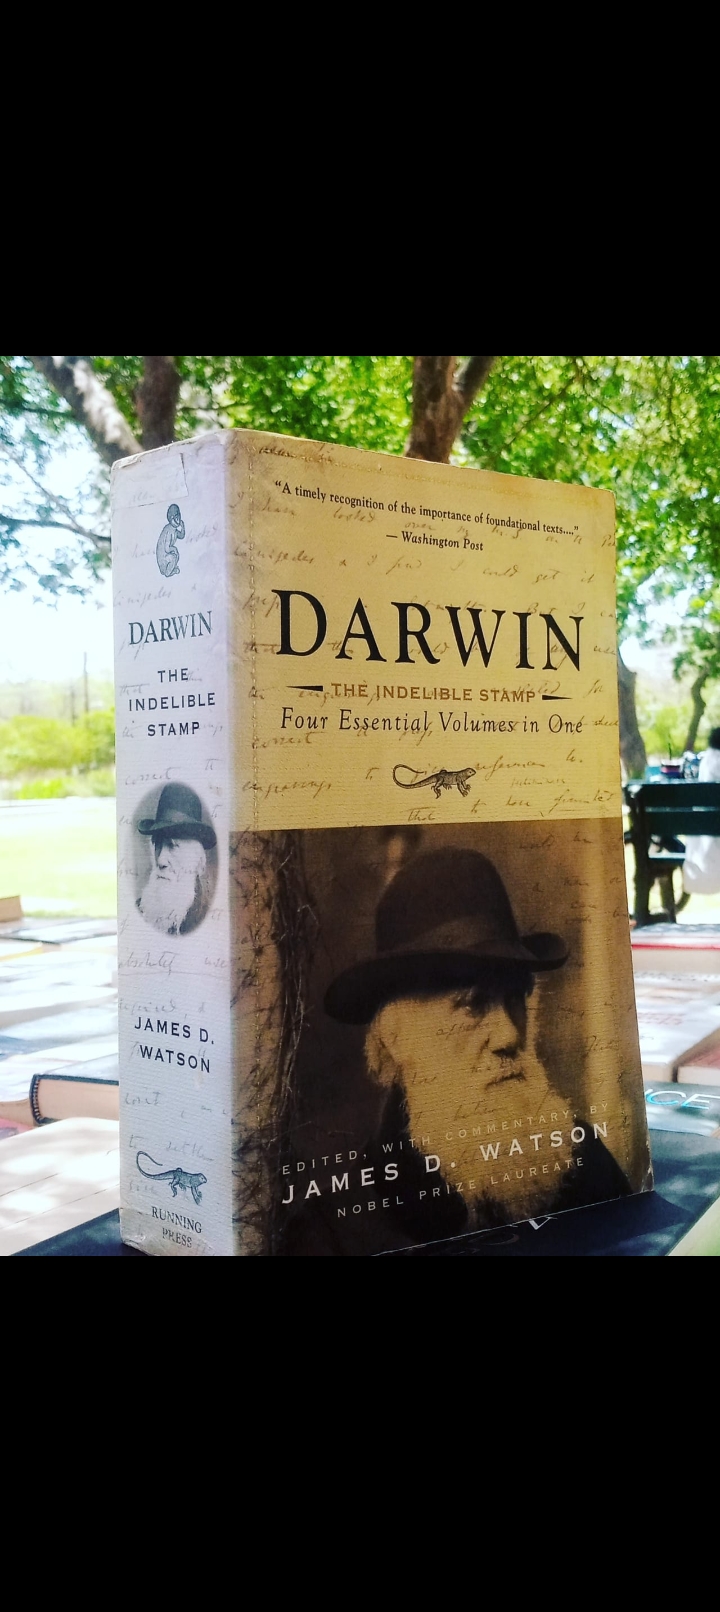 darwin the indelible stamp. four essential volumes in one edited by james watson. original paperback